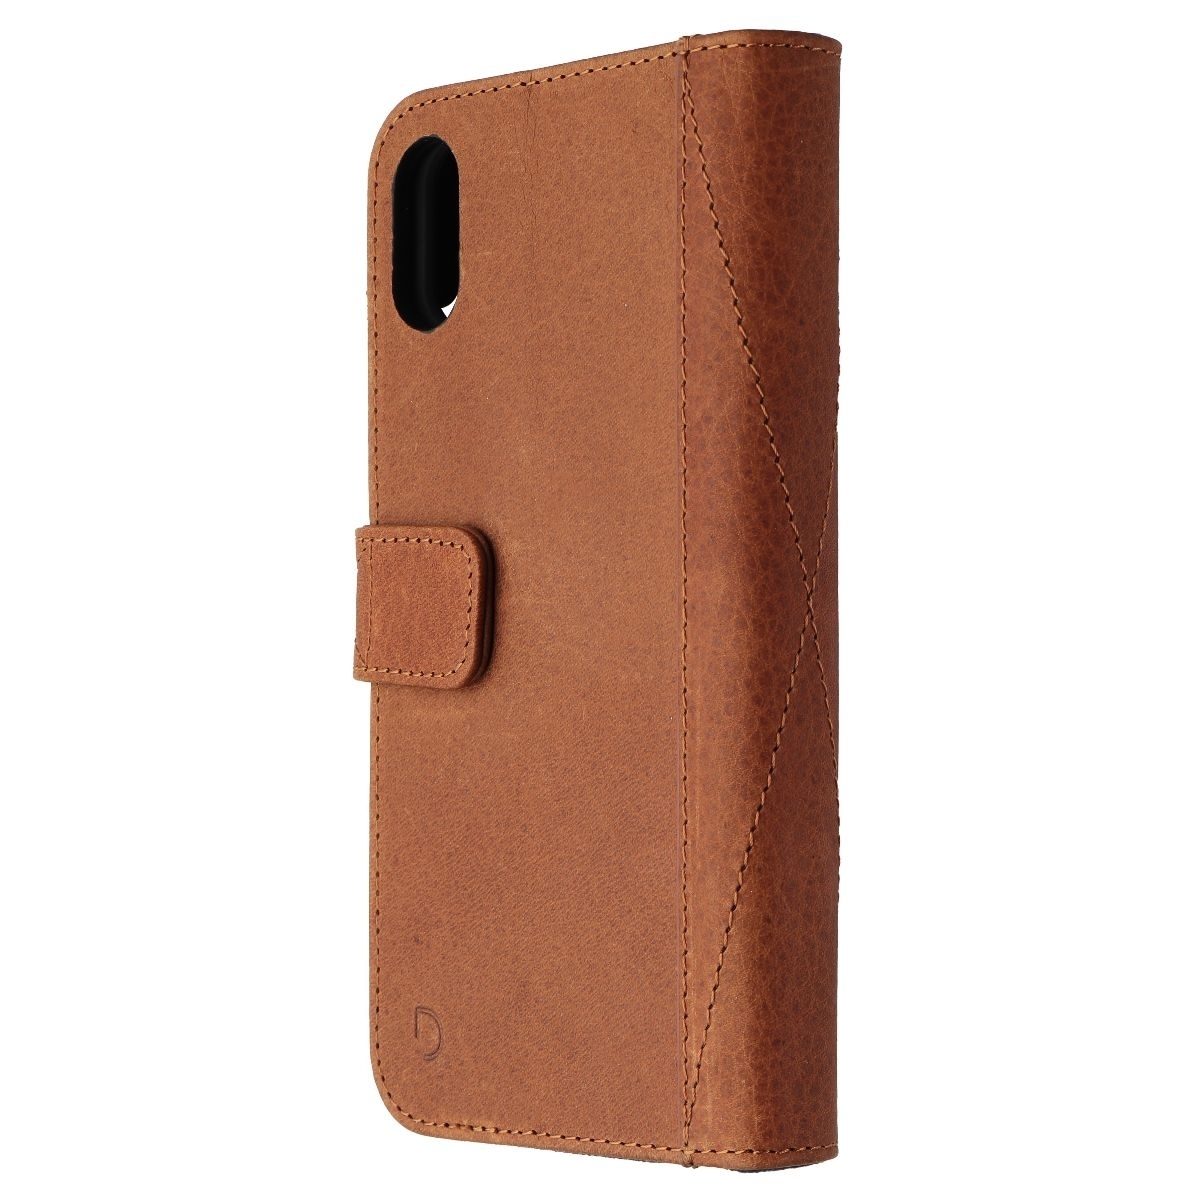 DECODED Full Grain Leather Folio + Case For Apple IPhone XR - Cinnamon Brown